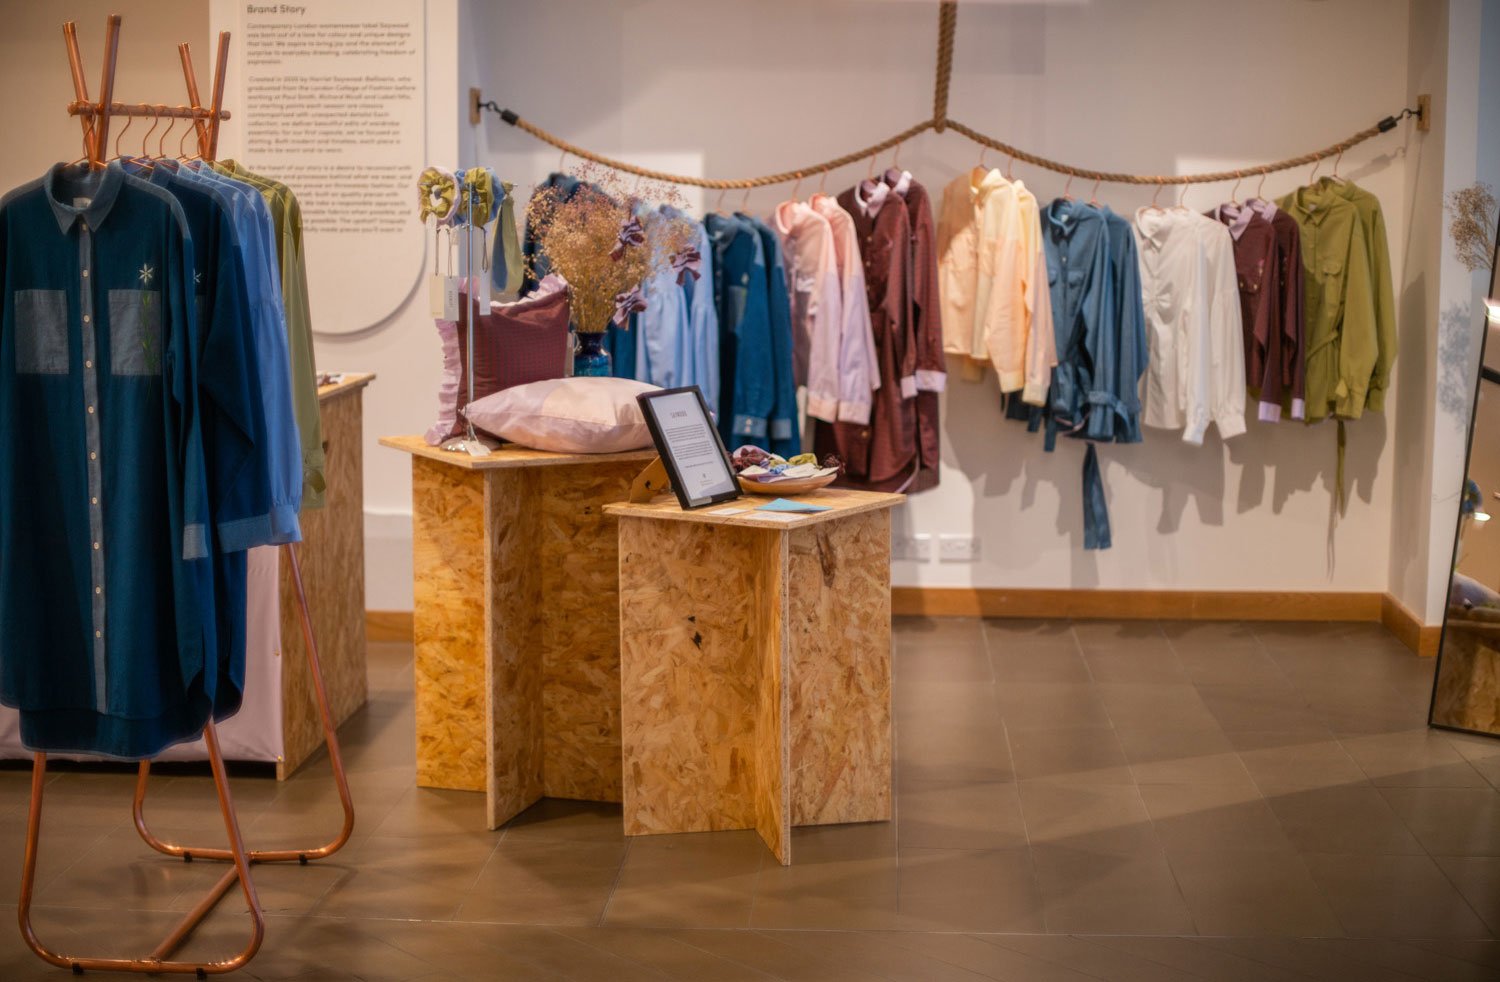 Saywood sustainable shirts and shirtdresses hanging on a rope rail in the background, the Japanese denim Etta Shirtdress in the foreground hanging on a copper rail, on Regent Street, London